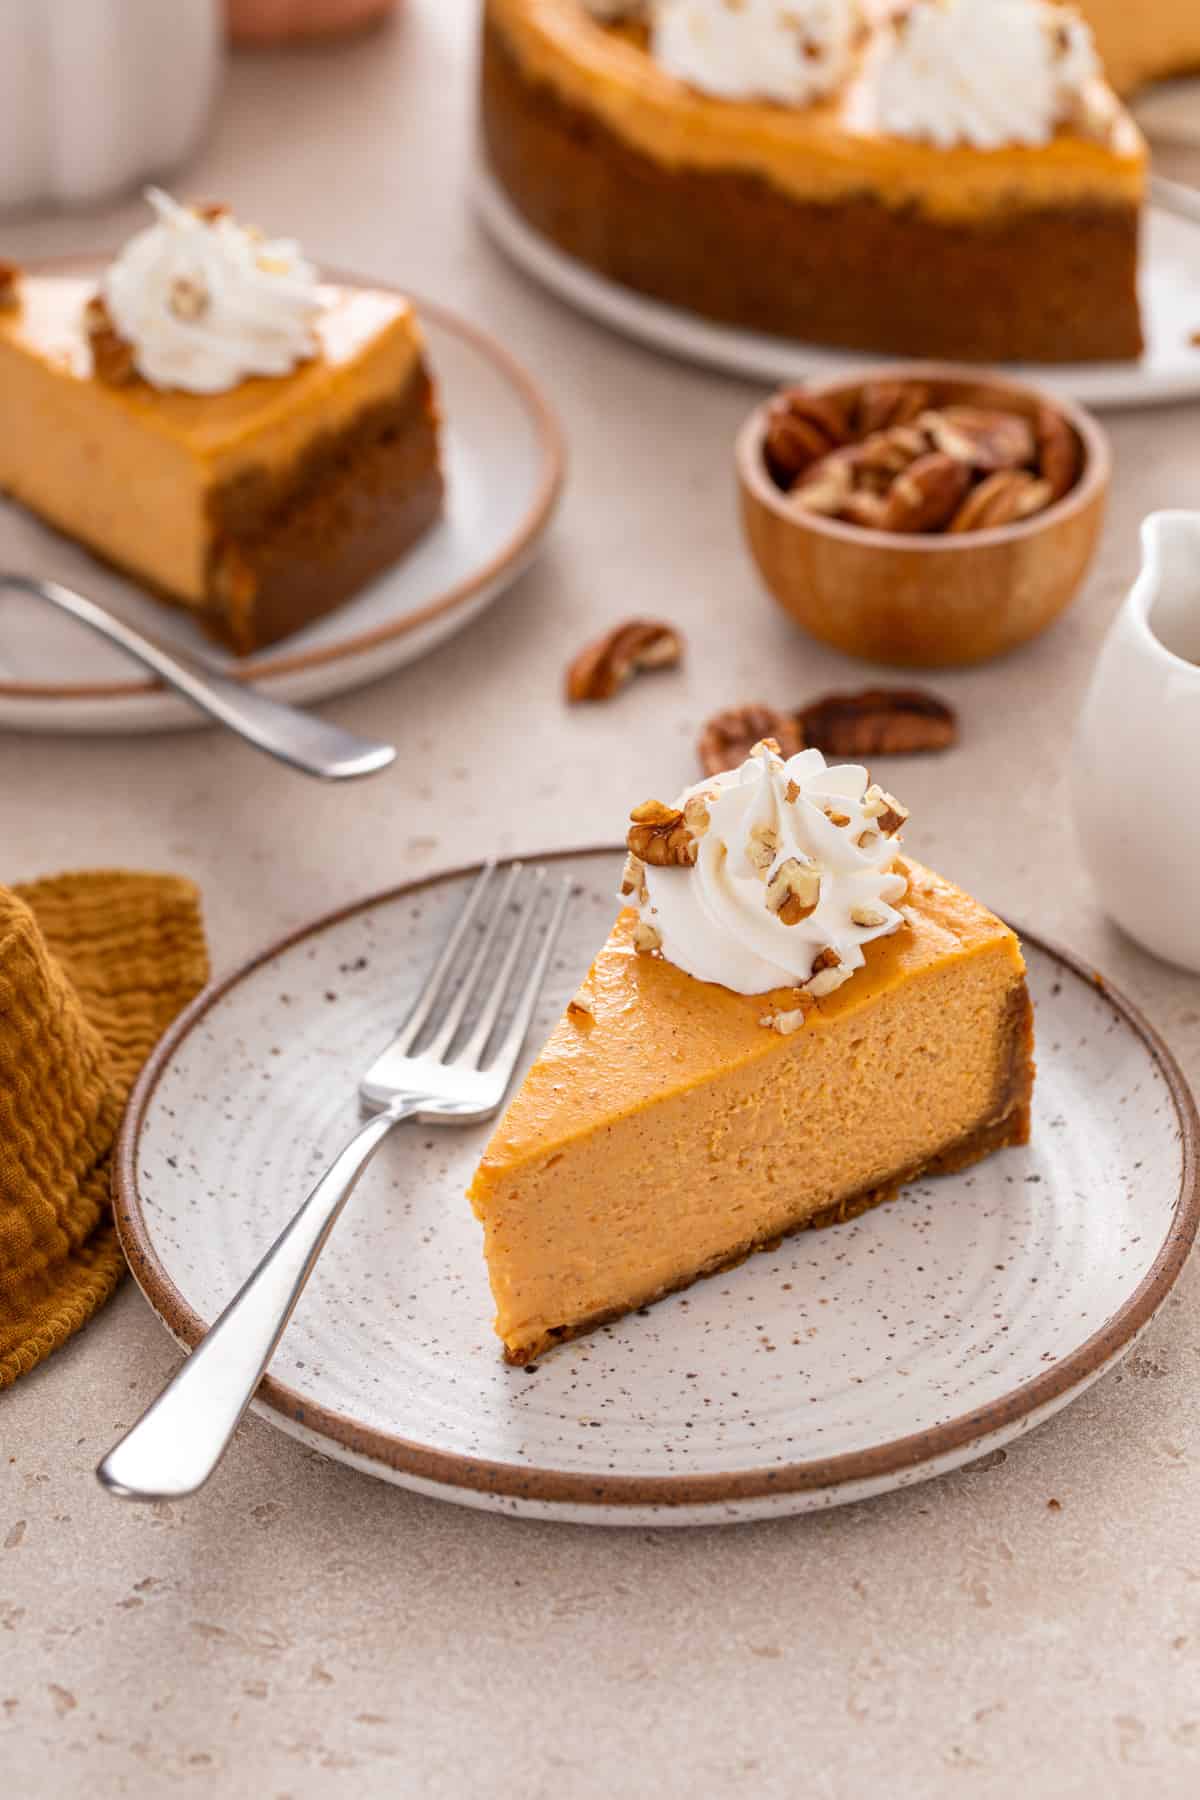 Slice of sweet potato cheesecake next to a fork on a stoneware plate, with a second plated slice visible in the background.